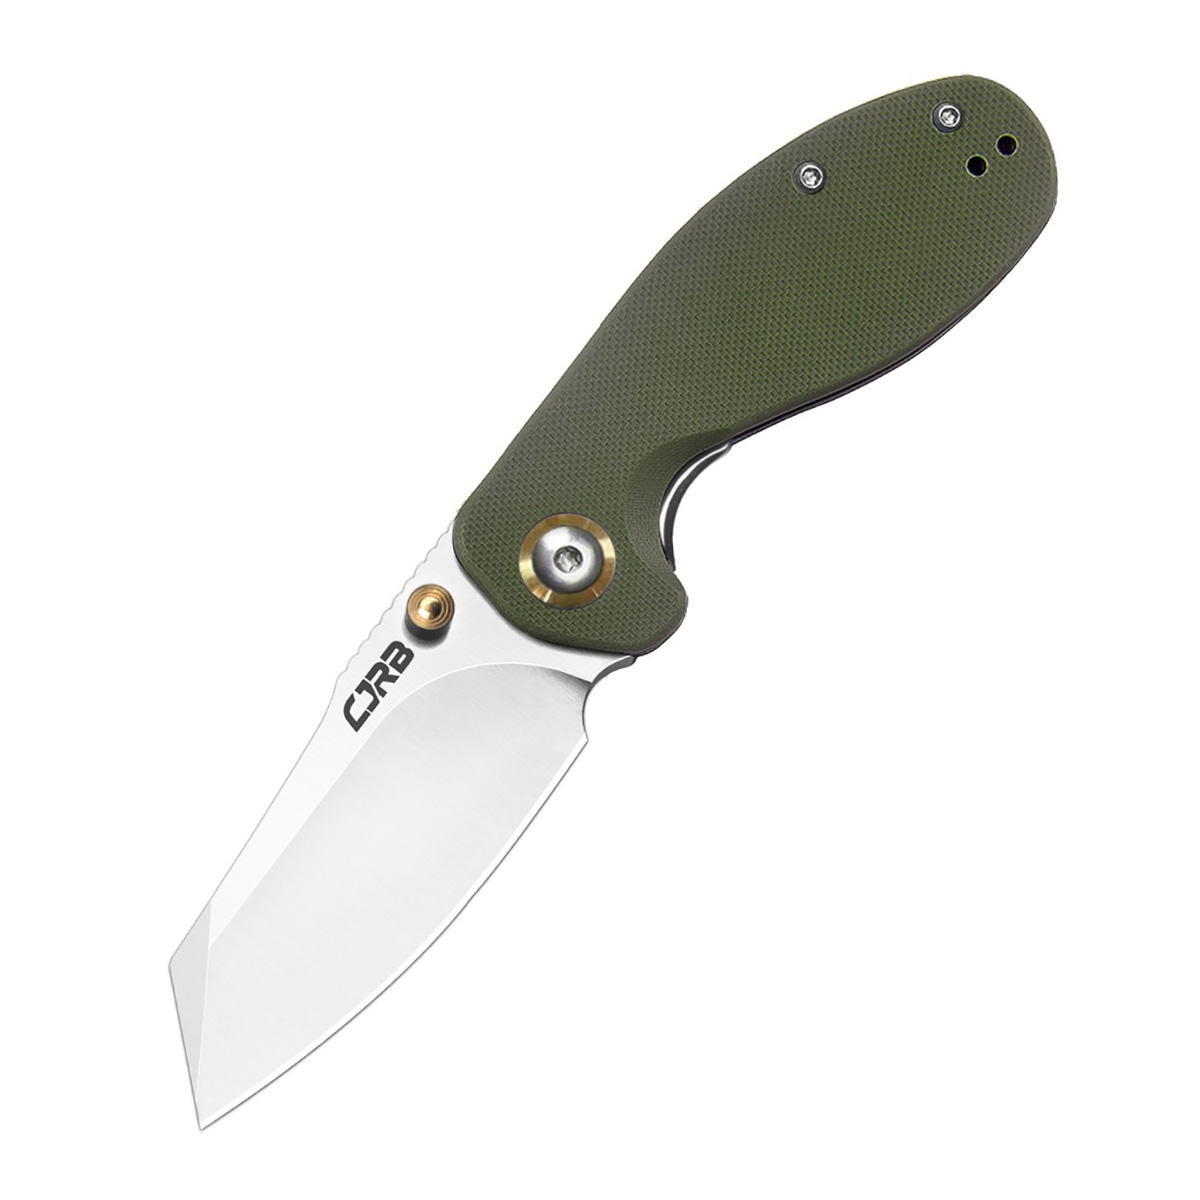   CJRB Large Swaggs Maileah,  AR-RPM9,  G10